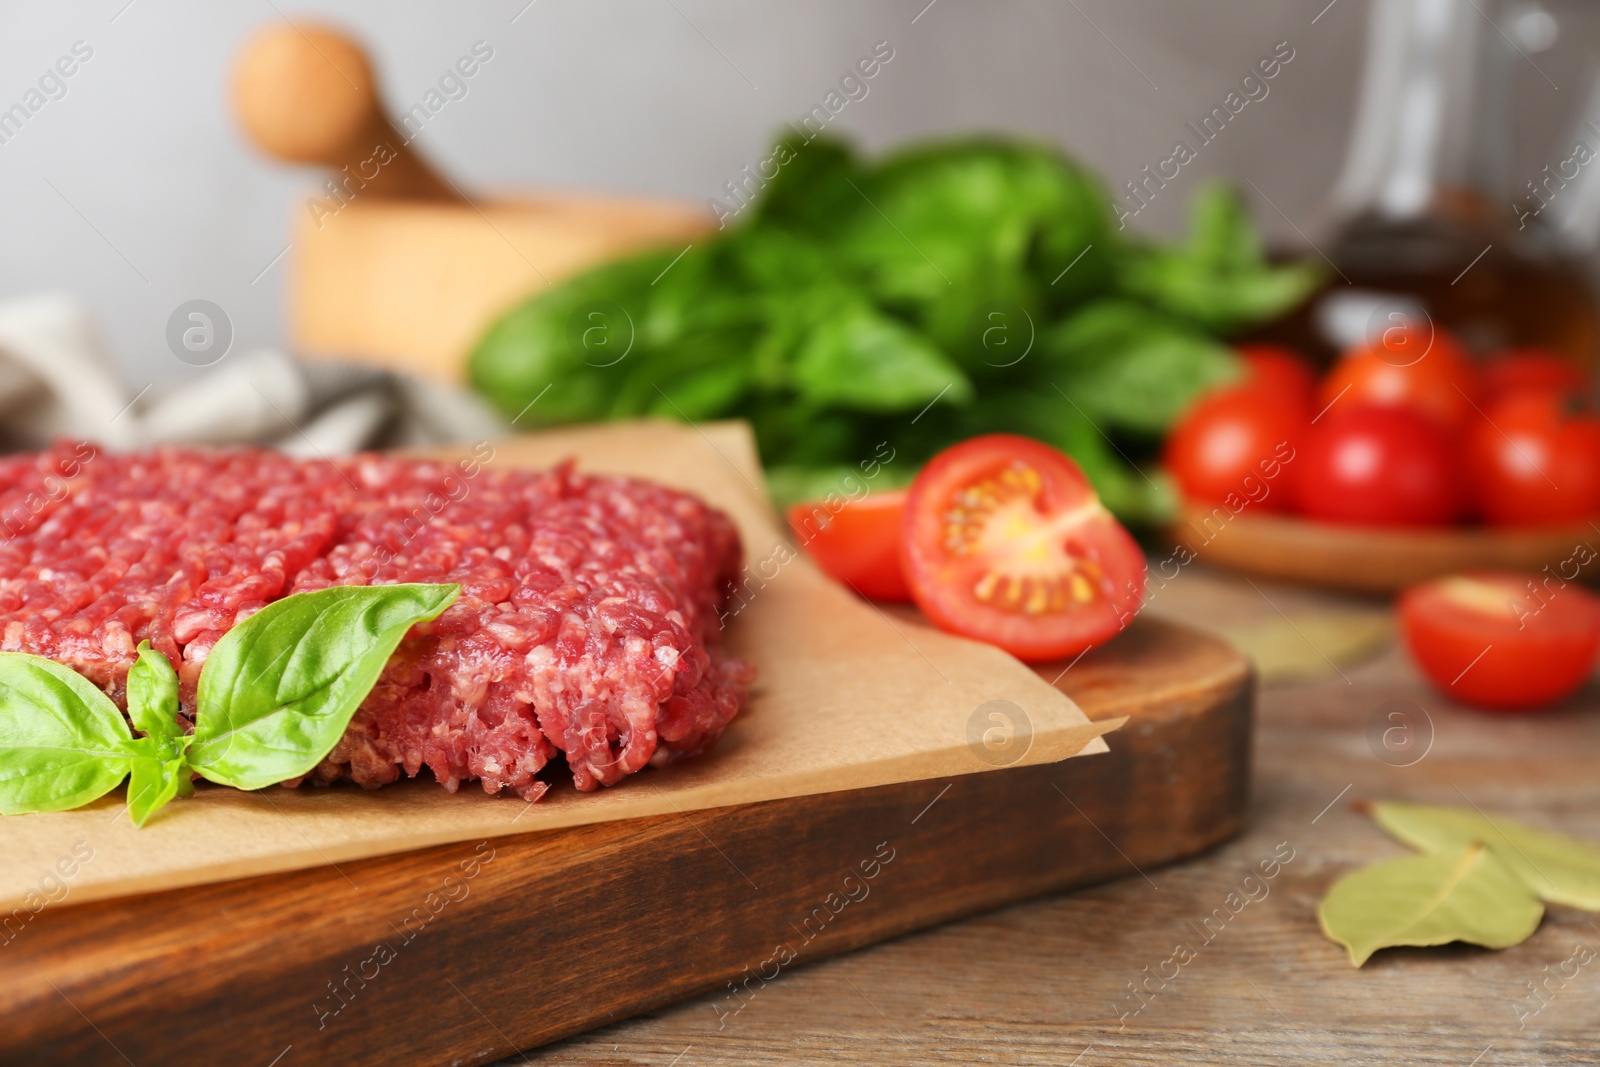 Photo of Fresh raw minced meat and vegetables on wooden table